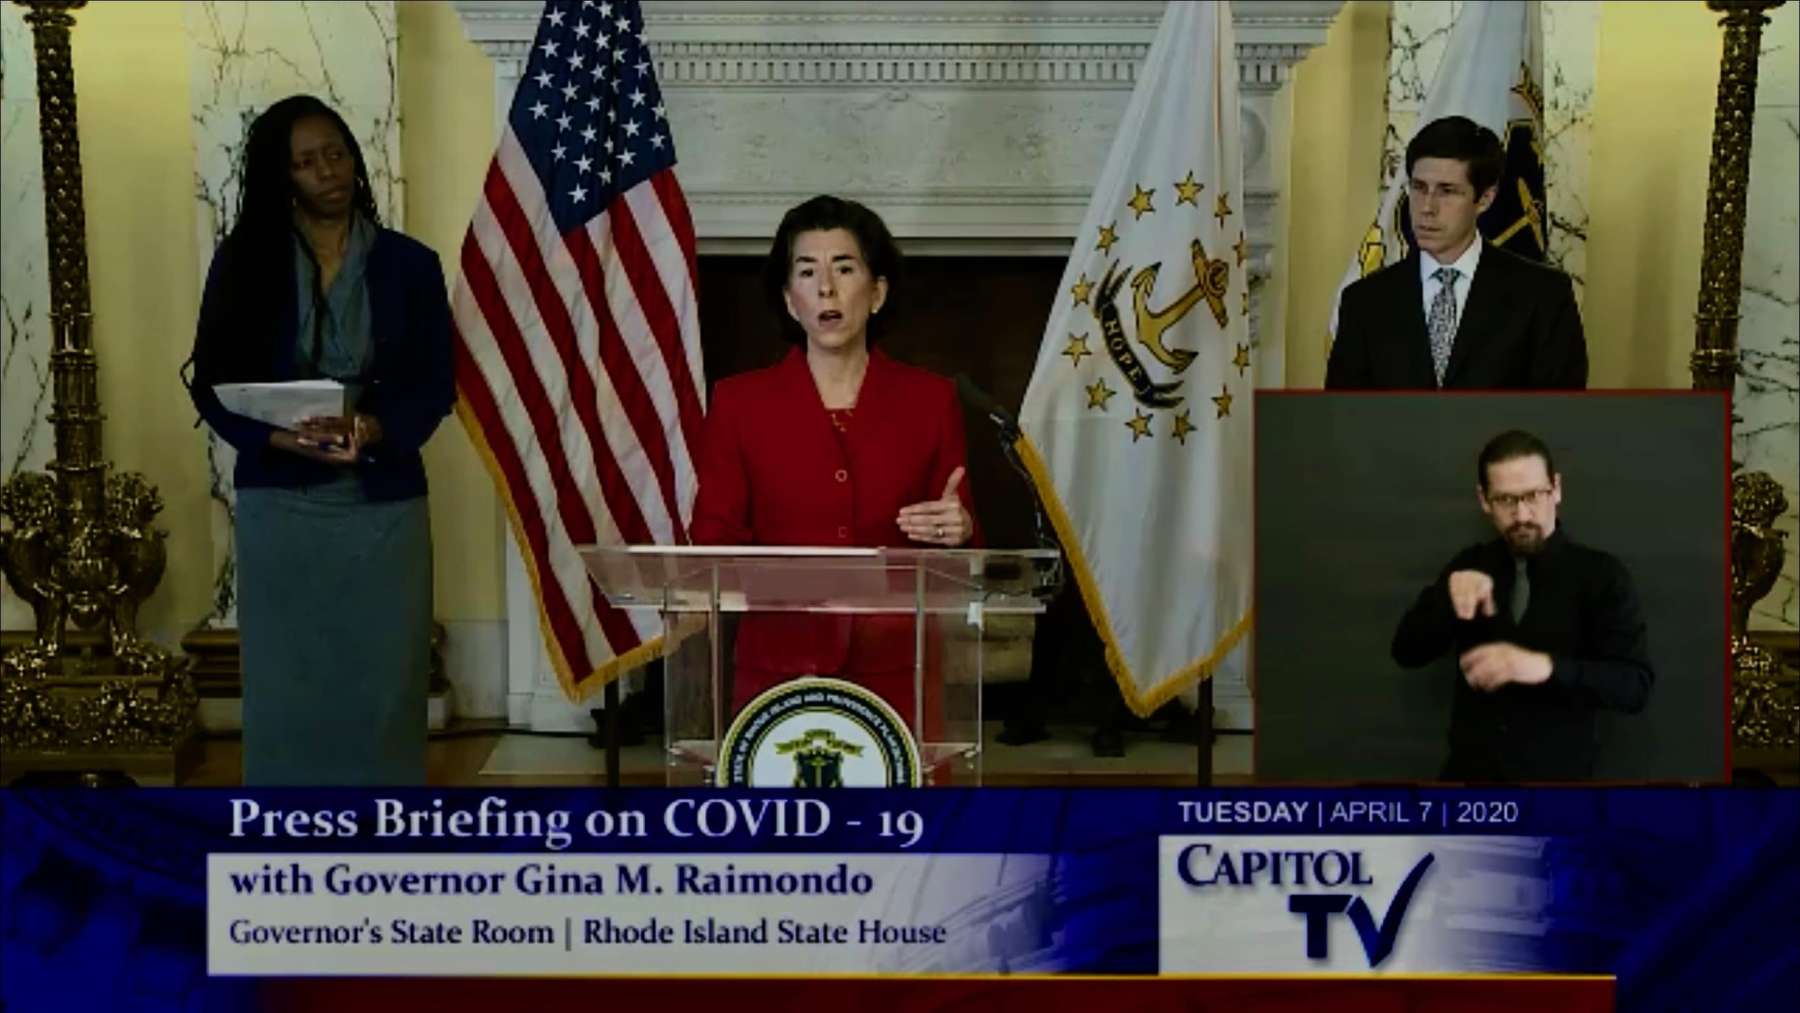 Rhode Island News: Governor Raimondo encourages undocumented residents to seek testing and healthcare during pandemic